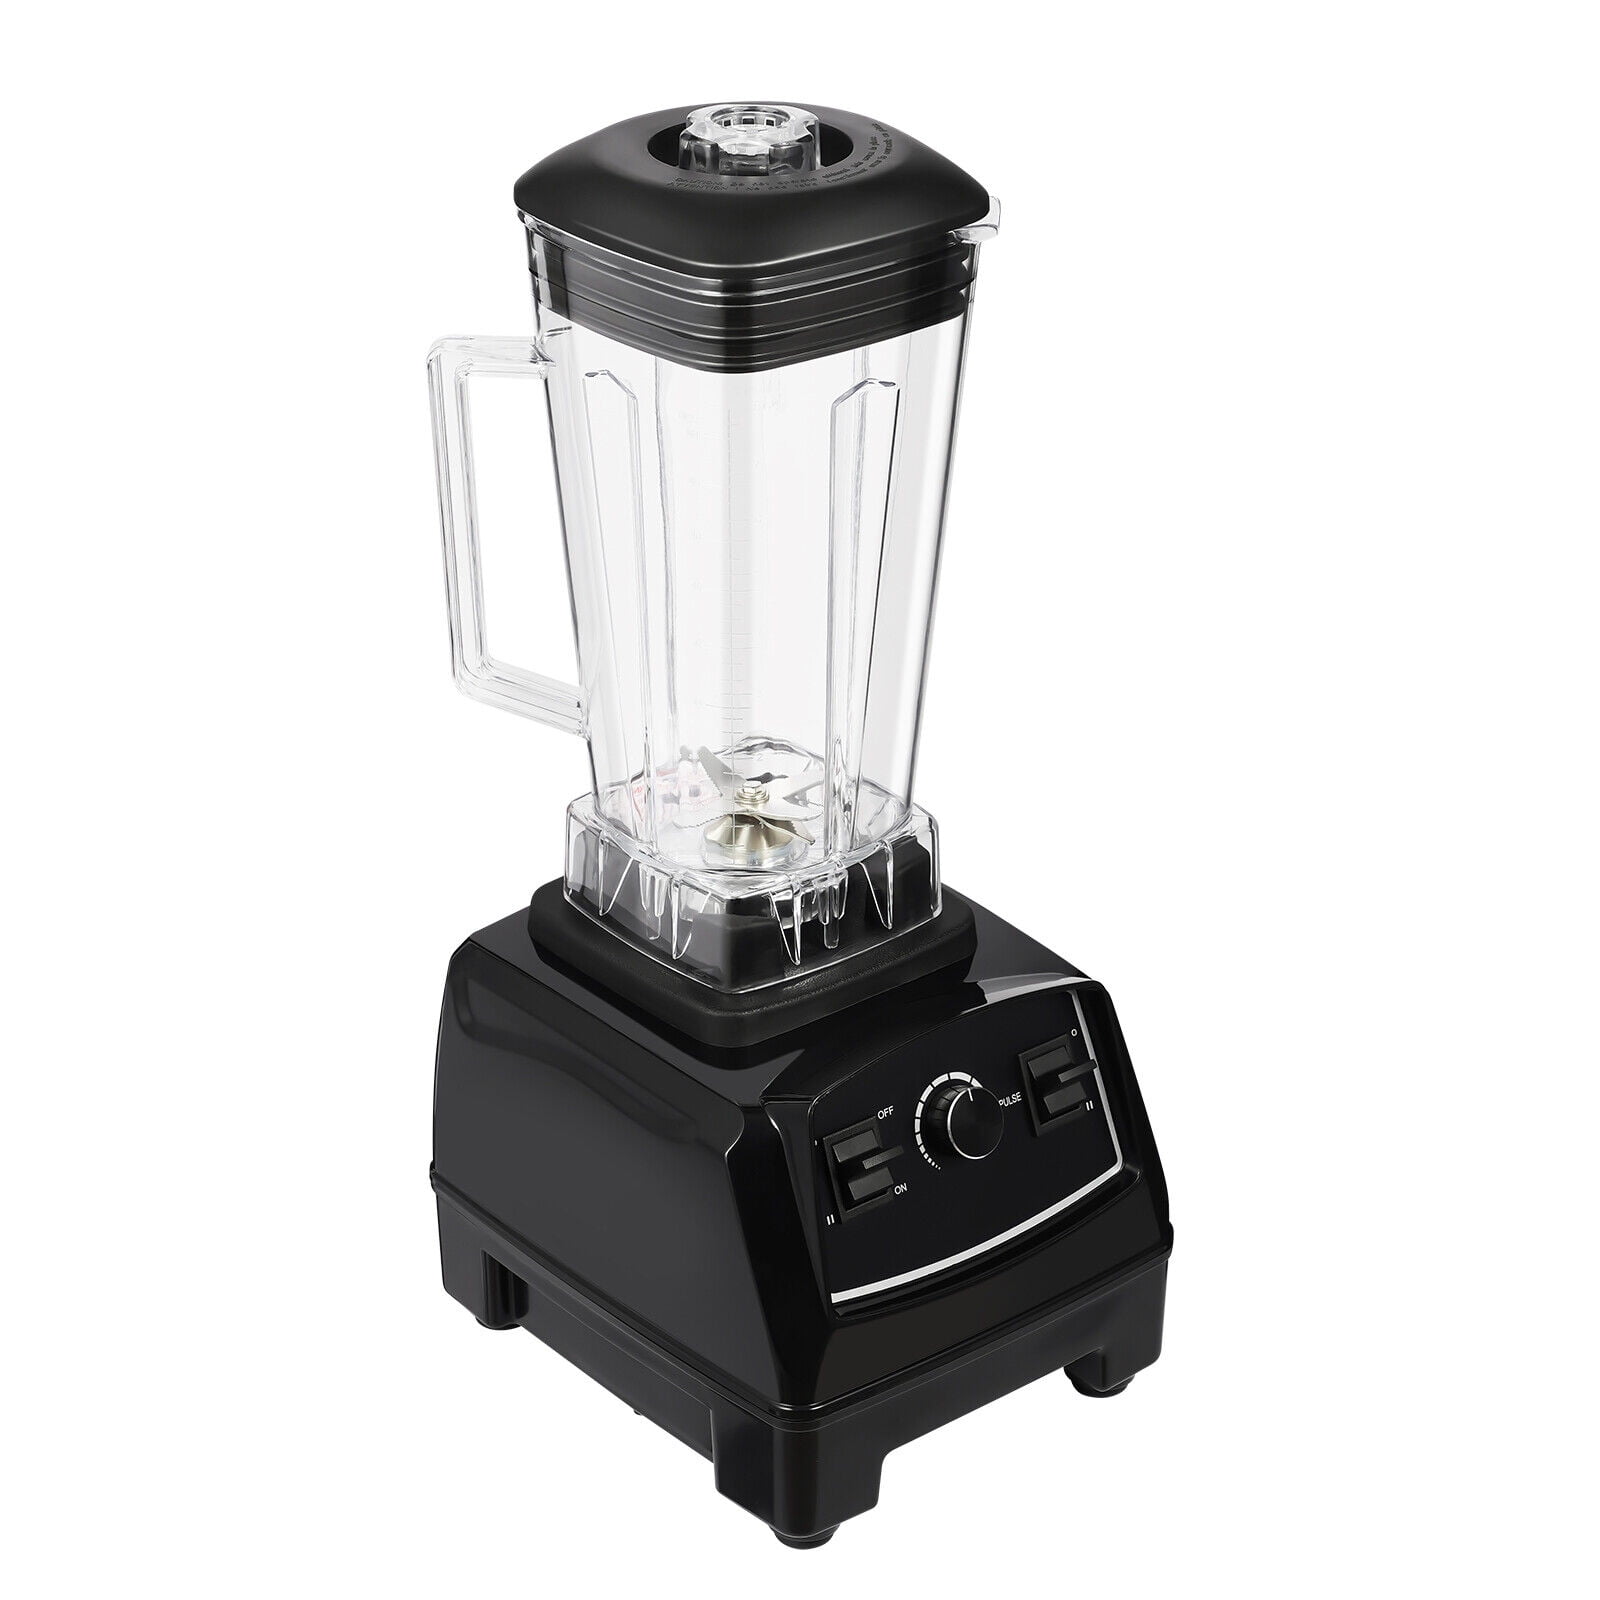 3HP Commercial blender 2238W Heavy Duty professional blender Free shipping  100% guaranteed NO. 1 quality in the world